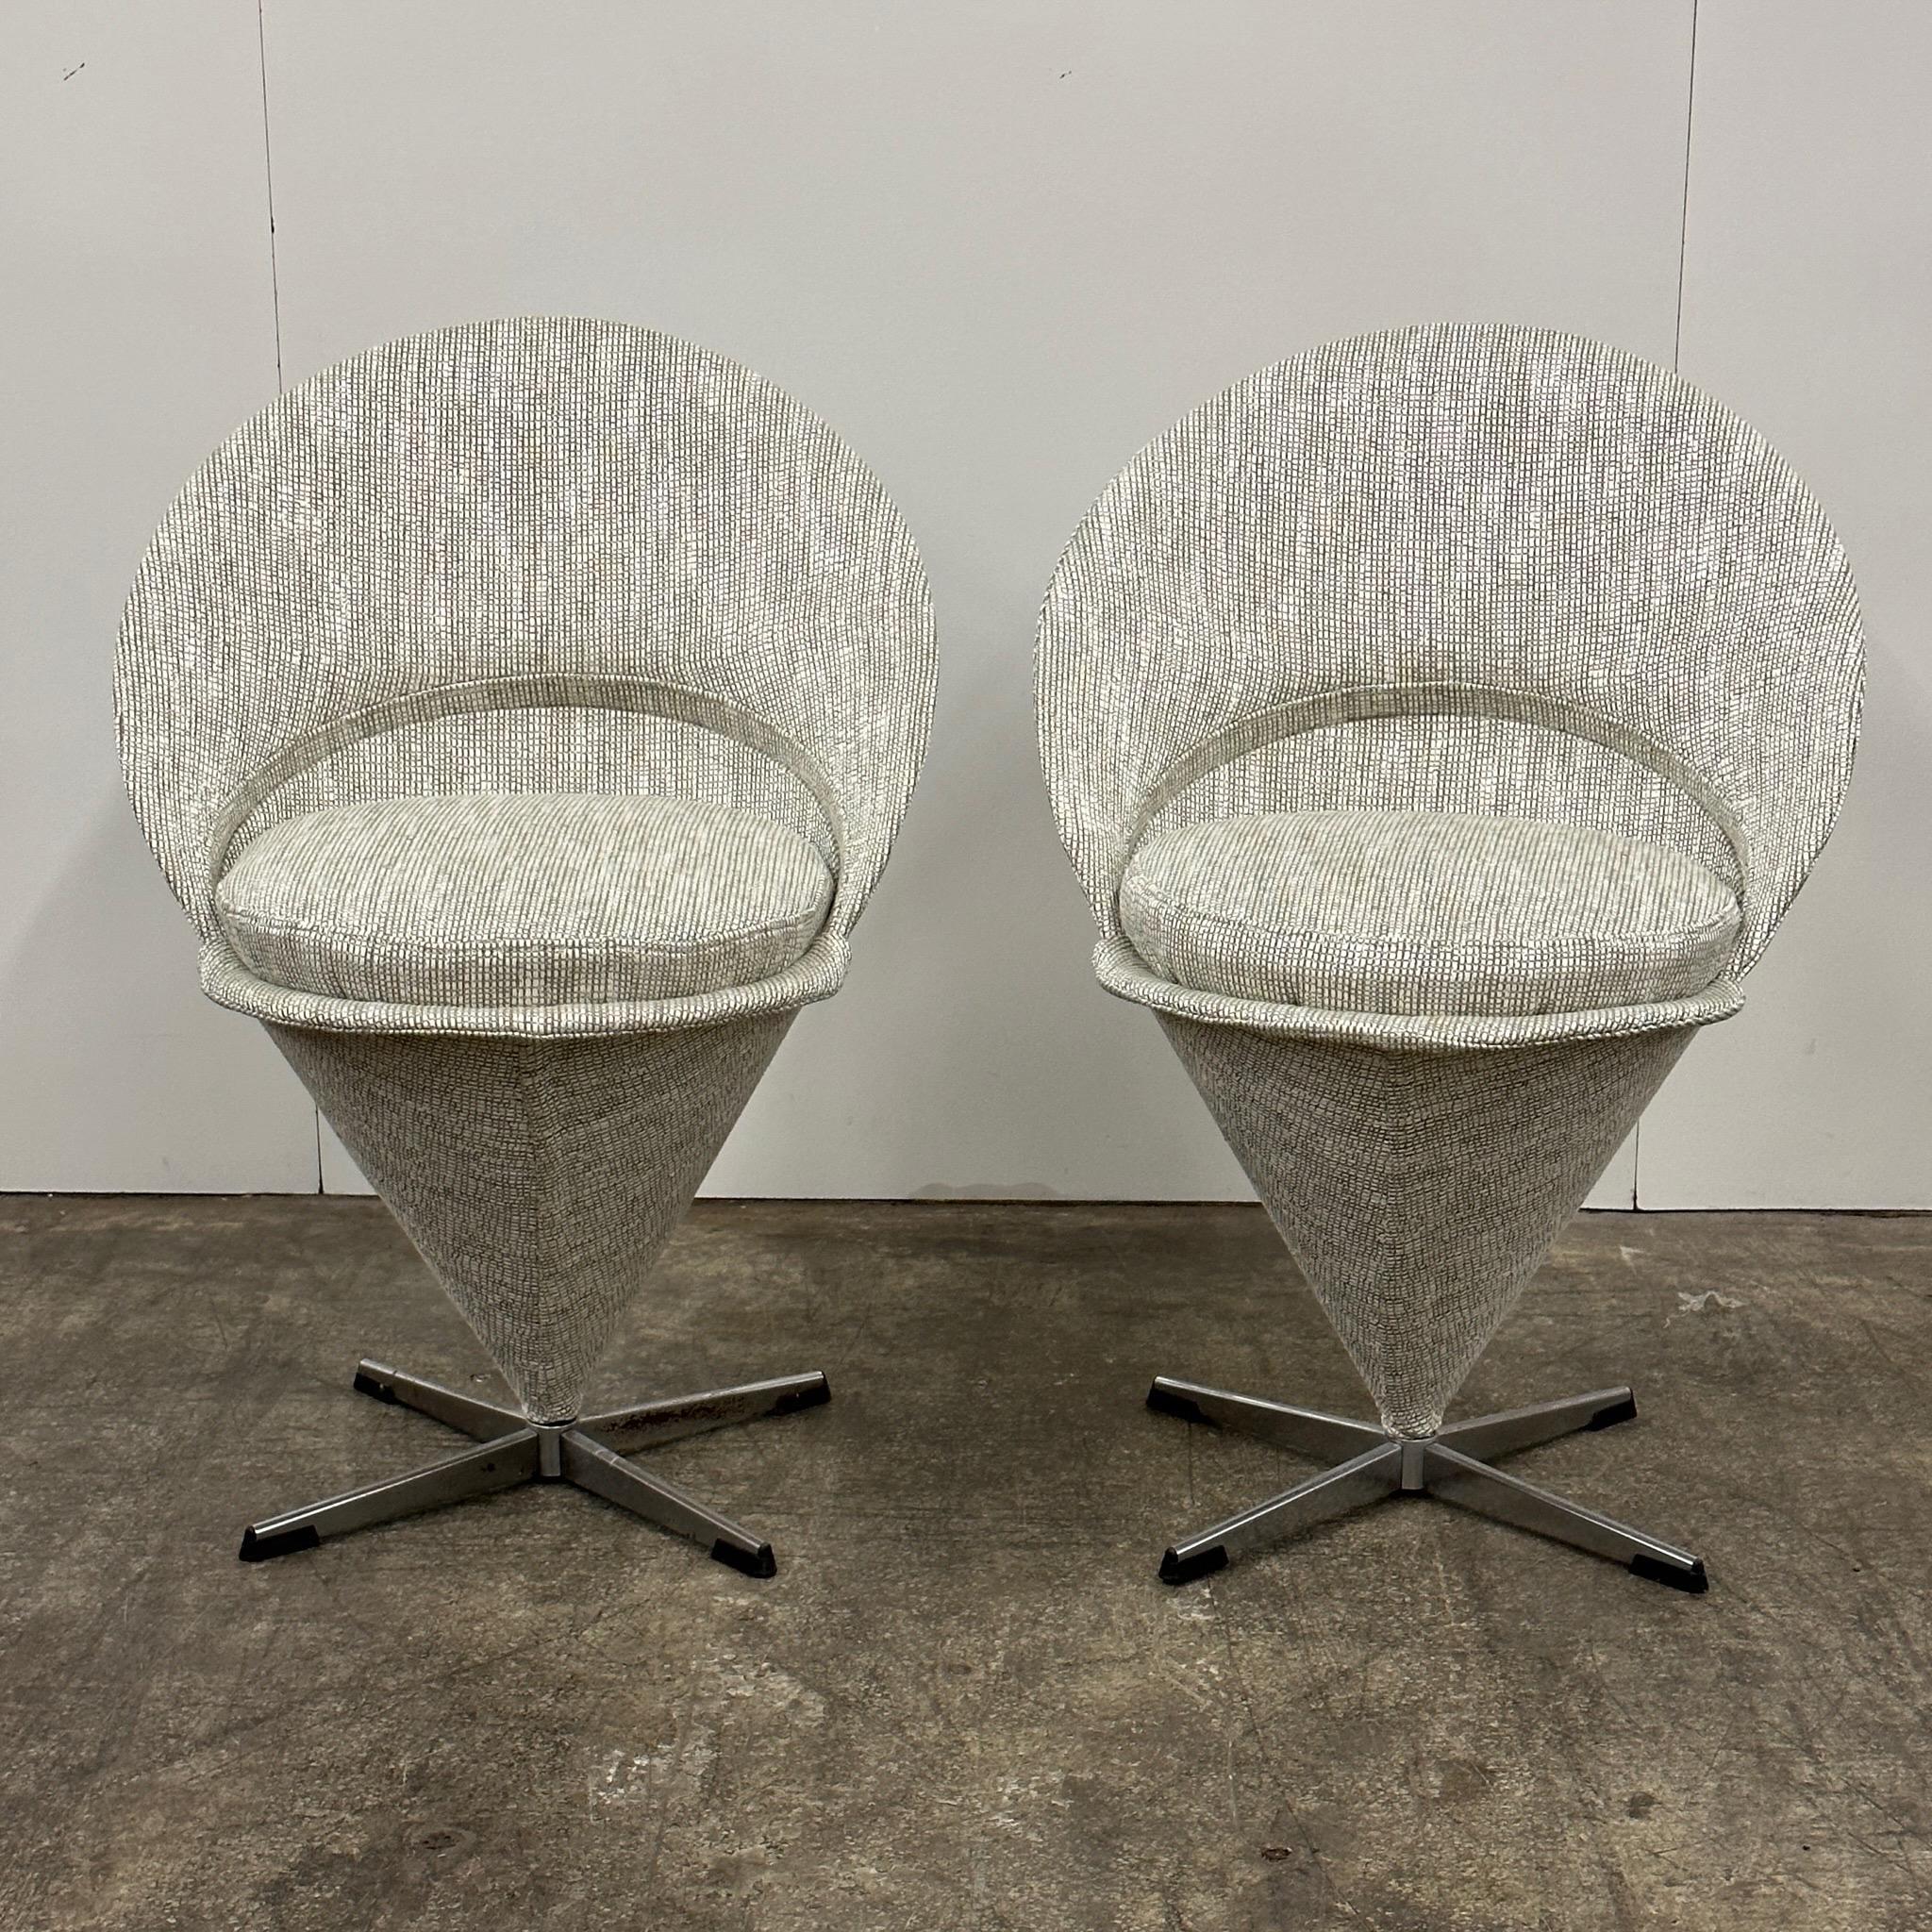 c. 1960s. Price is for the set. Contact us if you’d like to purchase a single item. We also have another available if needed. reupholstered in a chenille from Fishman’s. Grey/white is the main color with green undertones. 